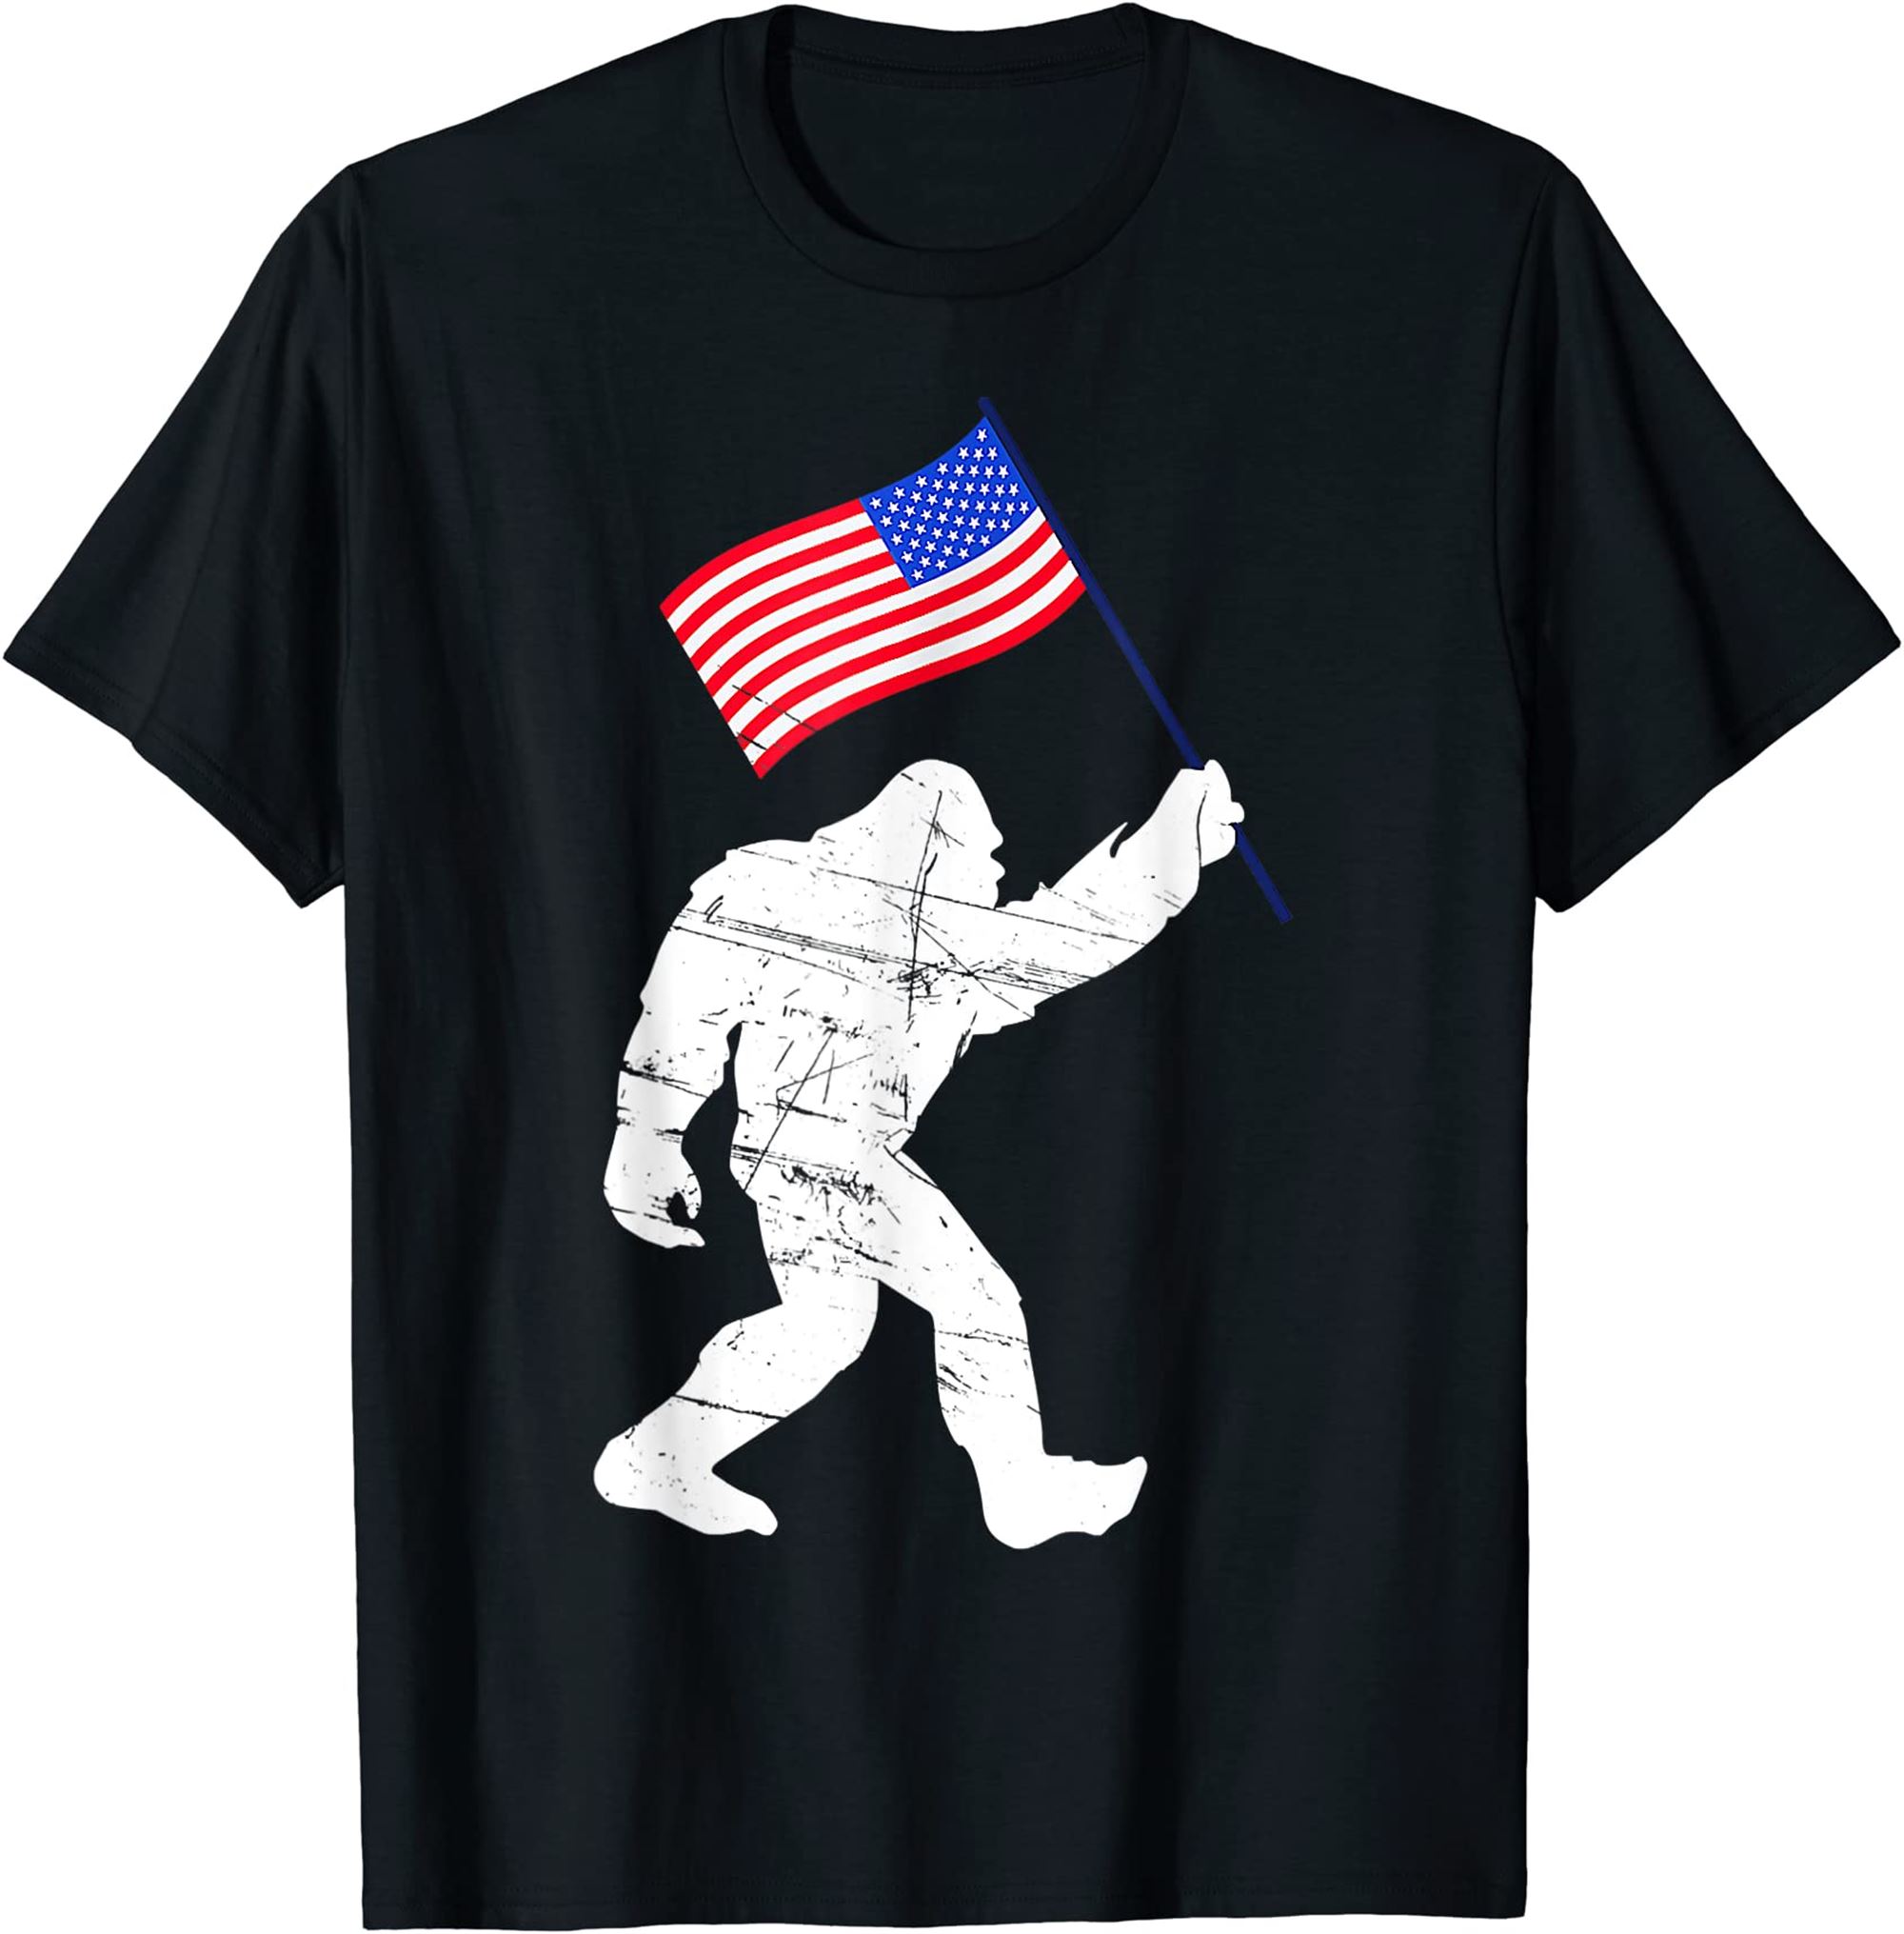 Bigfoot With American Flag Funny 4th Of July T-shirt Full Size Up To 5xl